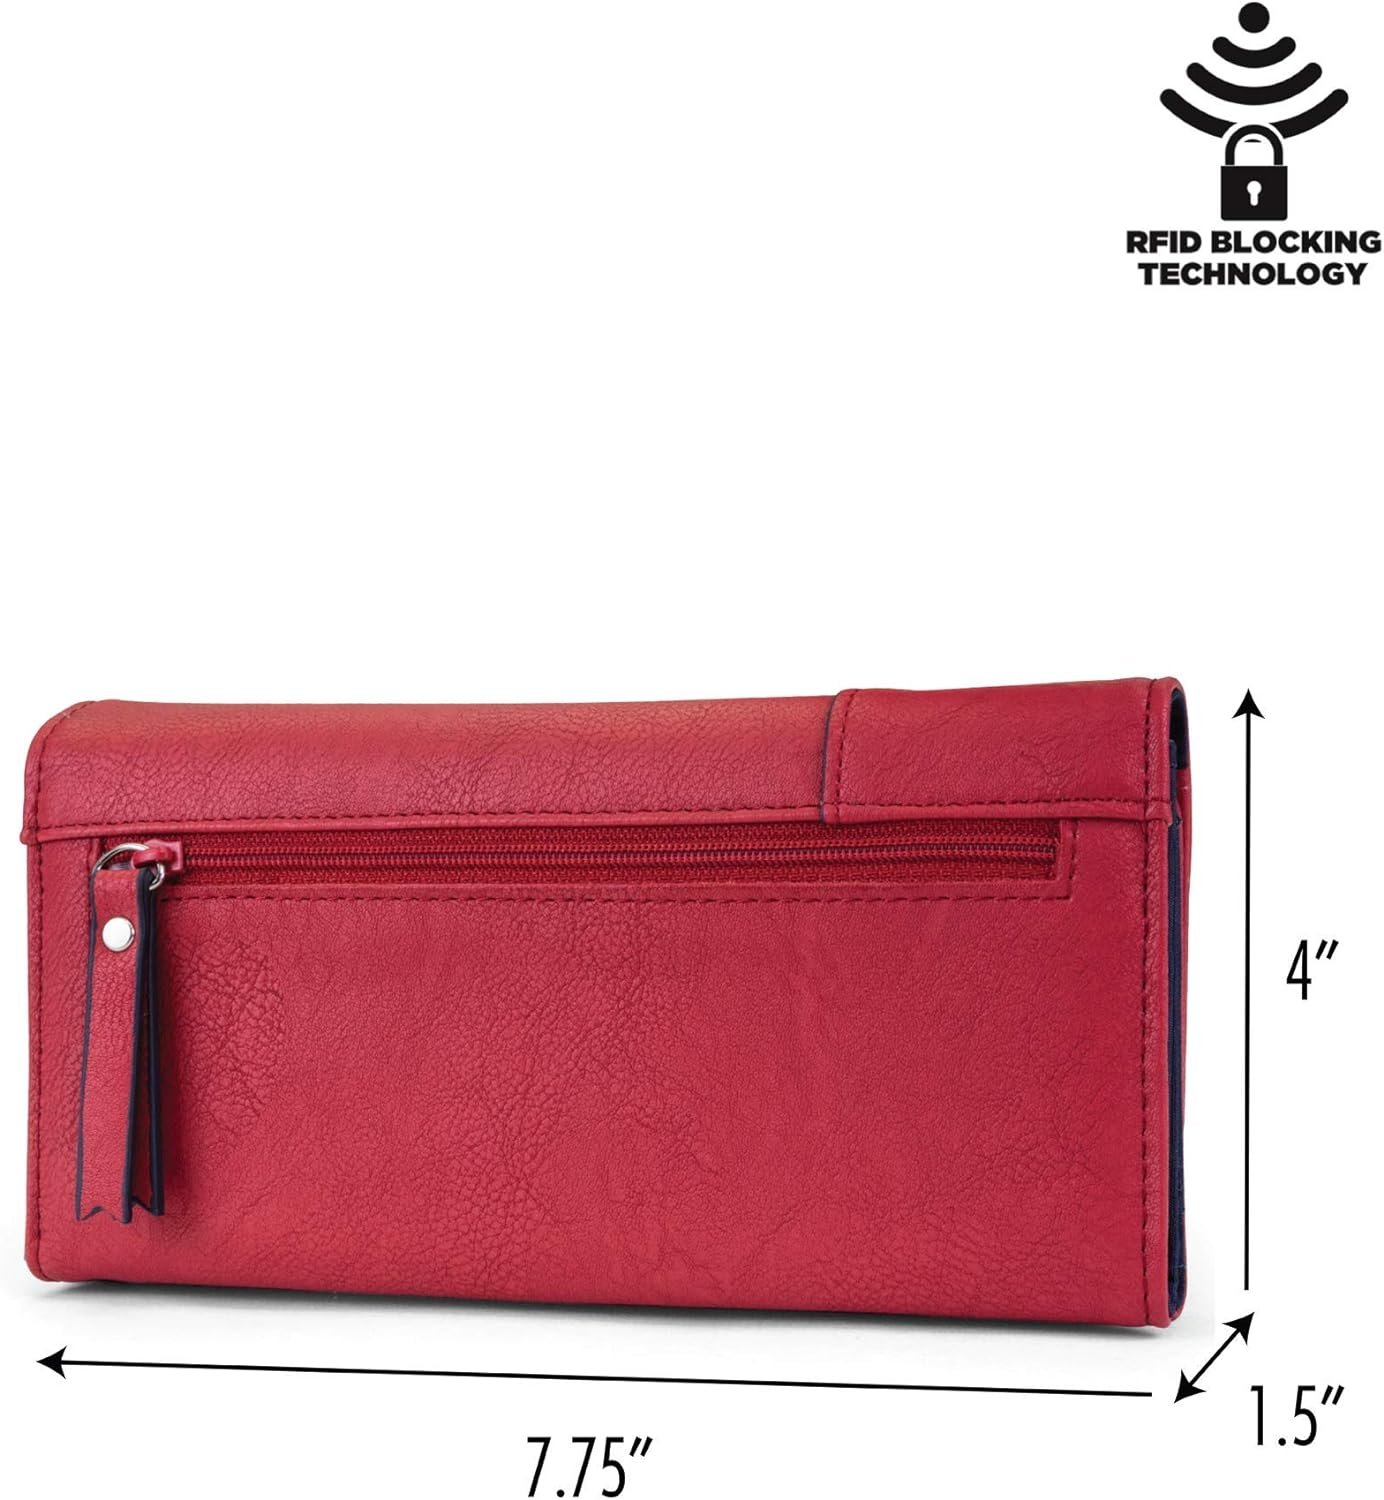 Nautica Money Manager RFID Slim Wallet Review